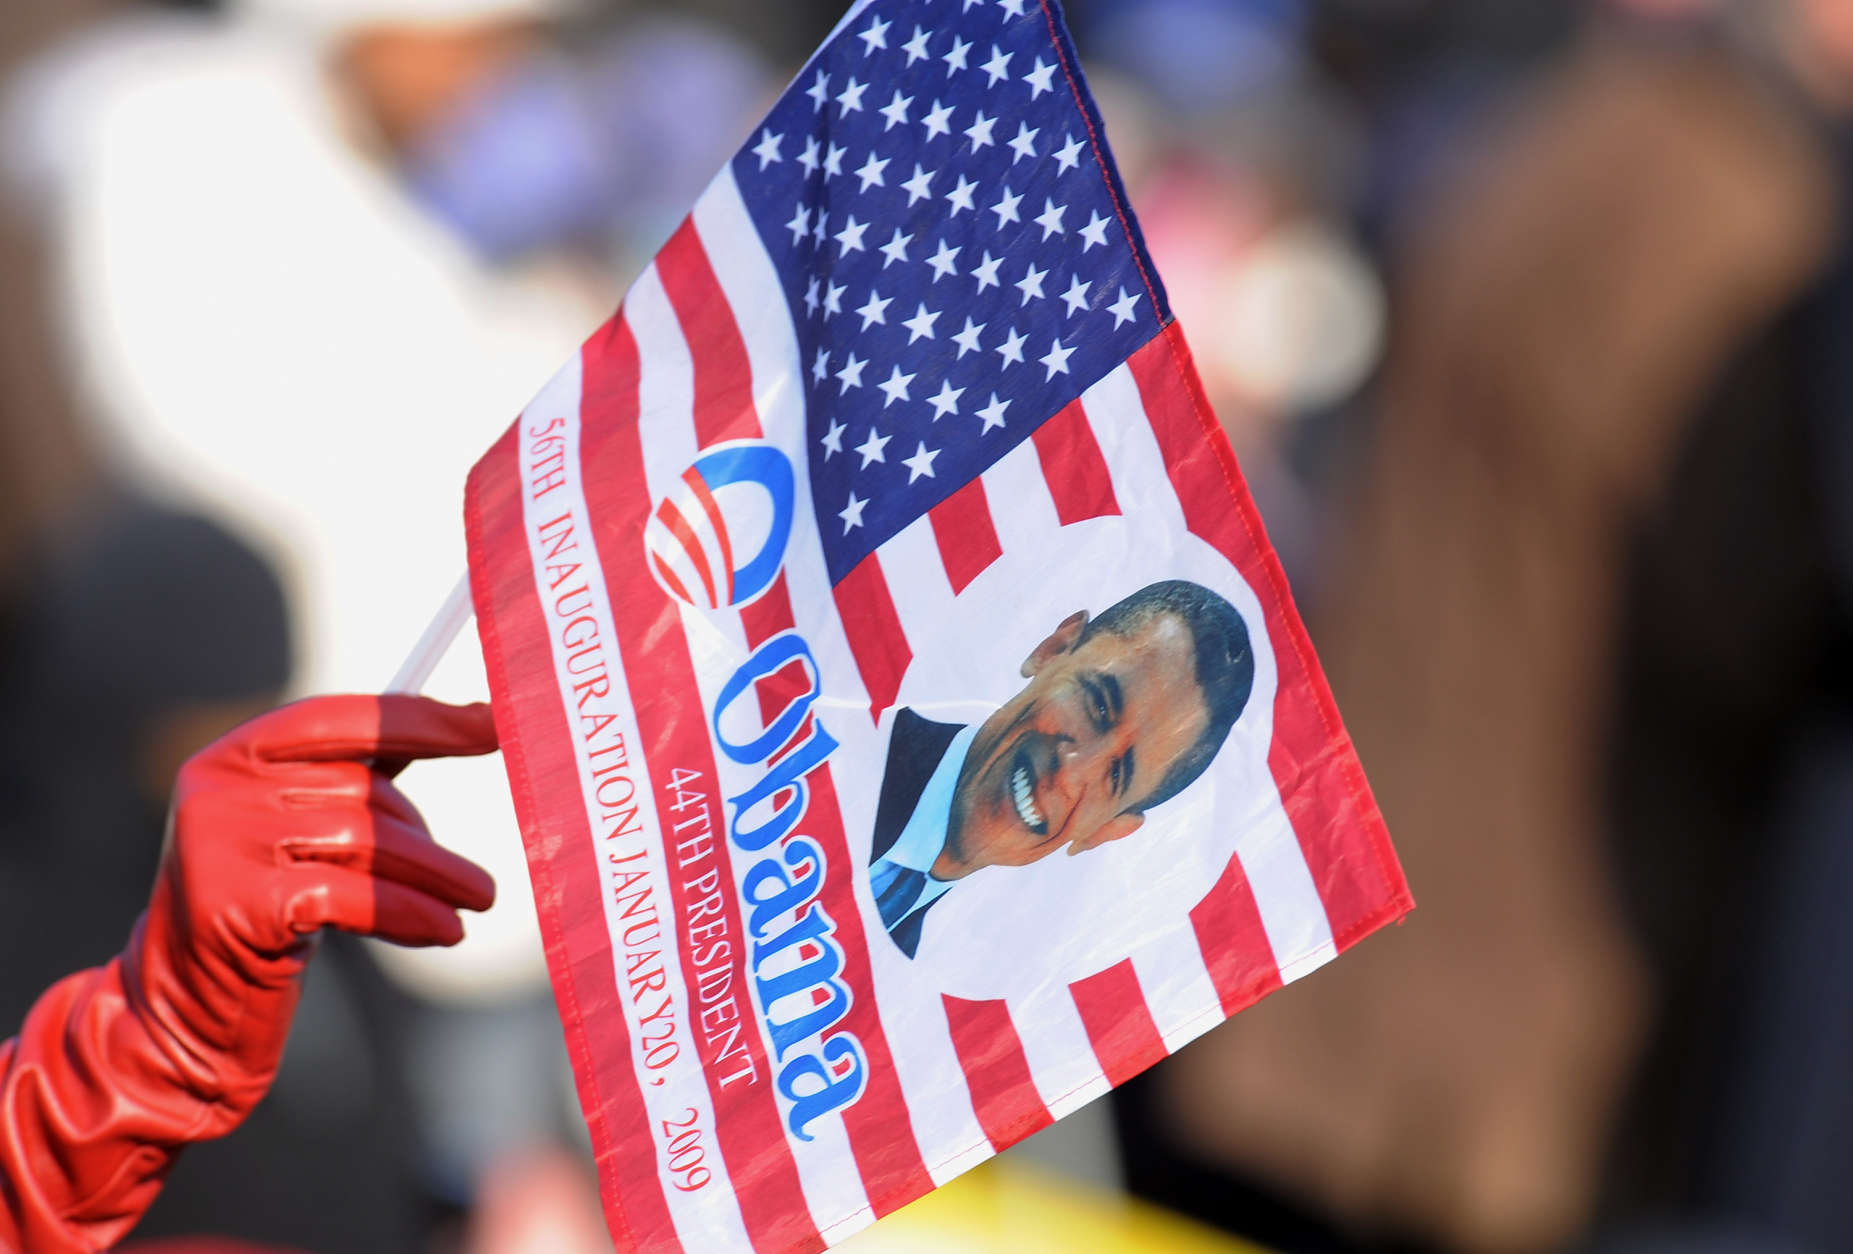 A spectator in the crowd waves a souvenir Barack Obama flag prior to the Presidential Inauguration in Washington, Tuesday, Jan. 20, 2009.   (AP Photo/Evan Agostini)